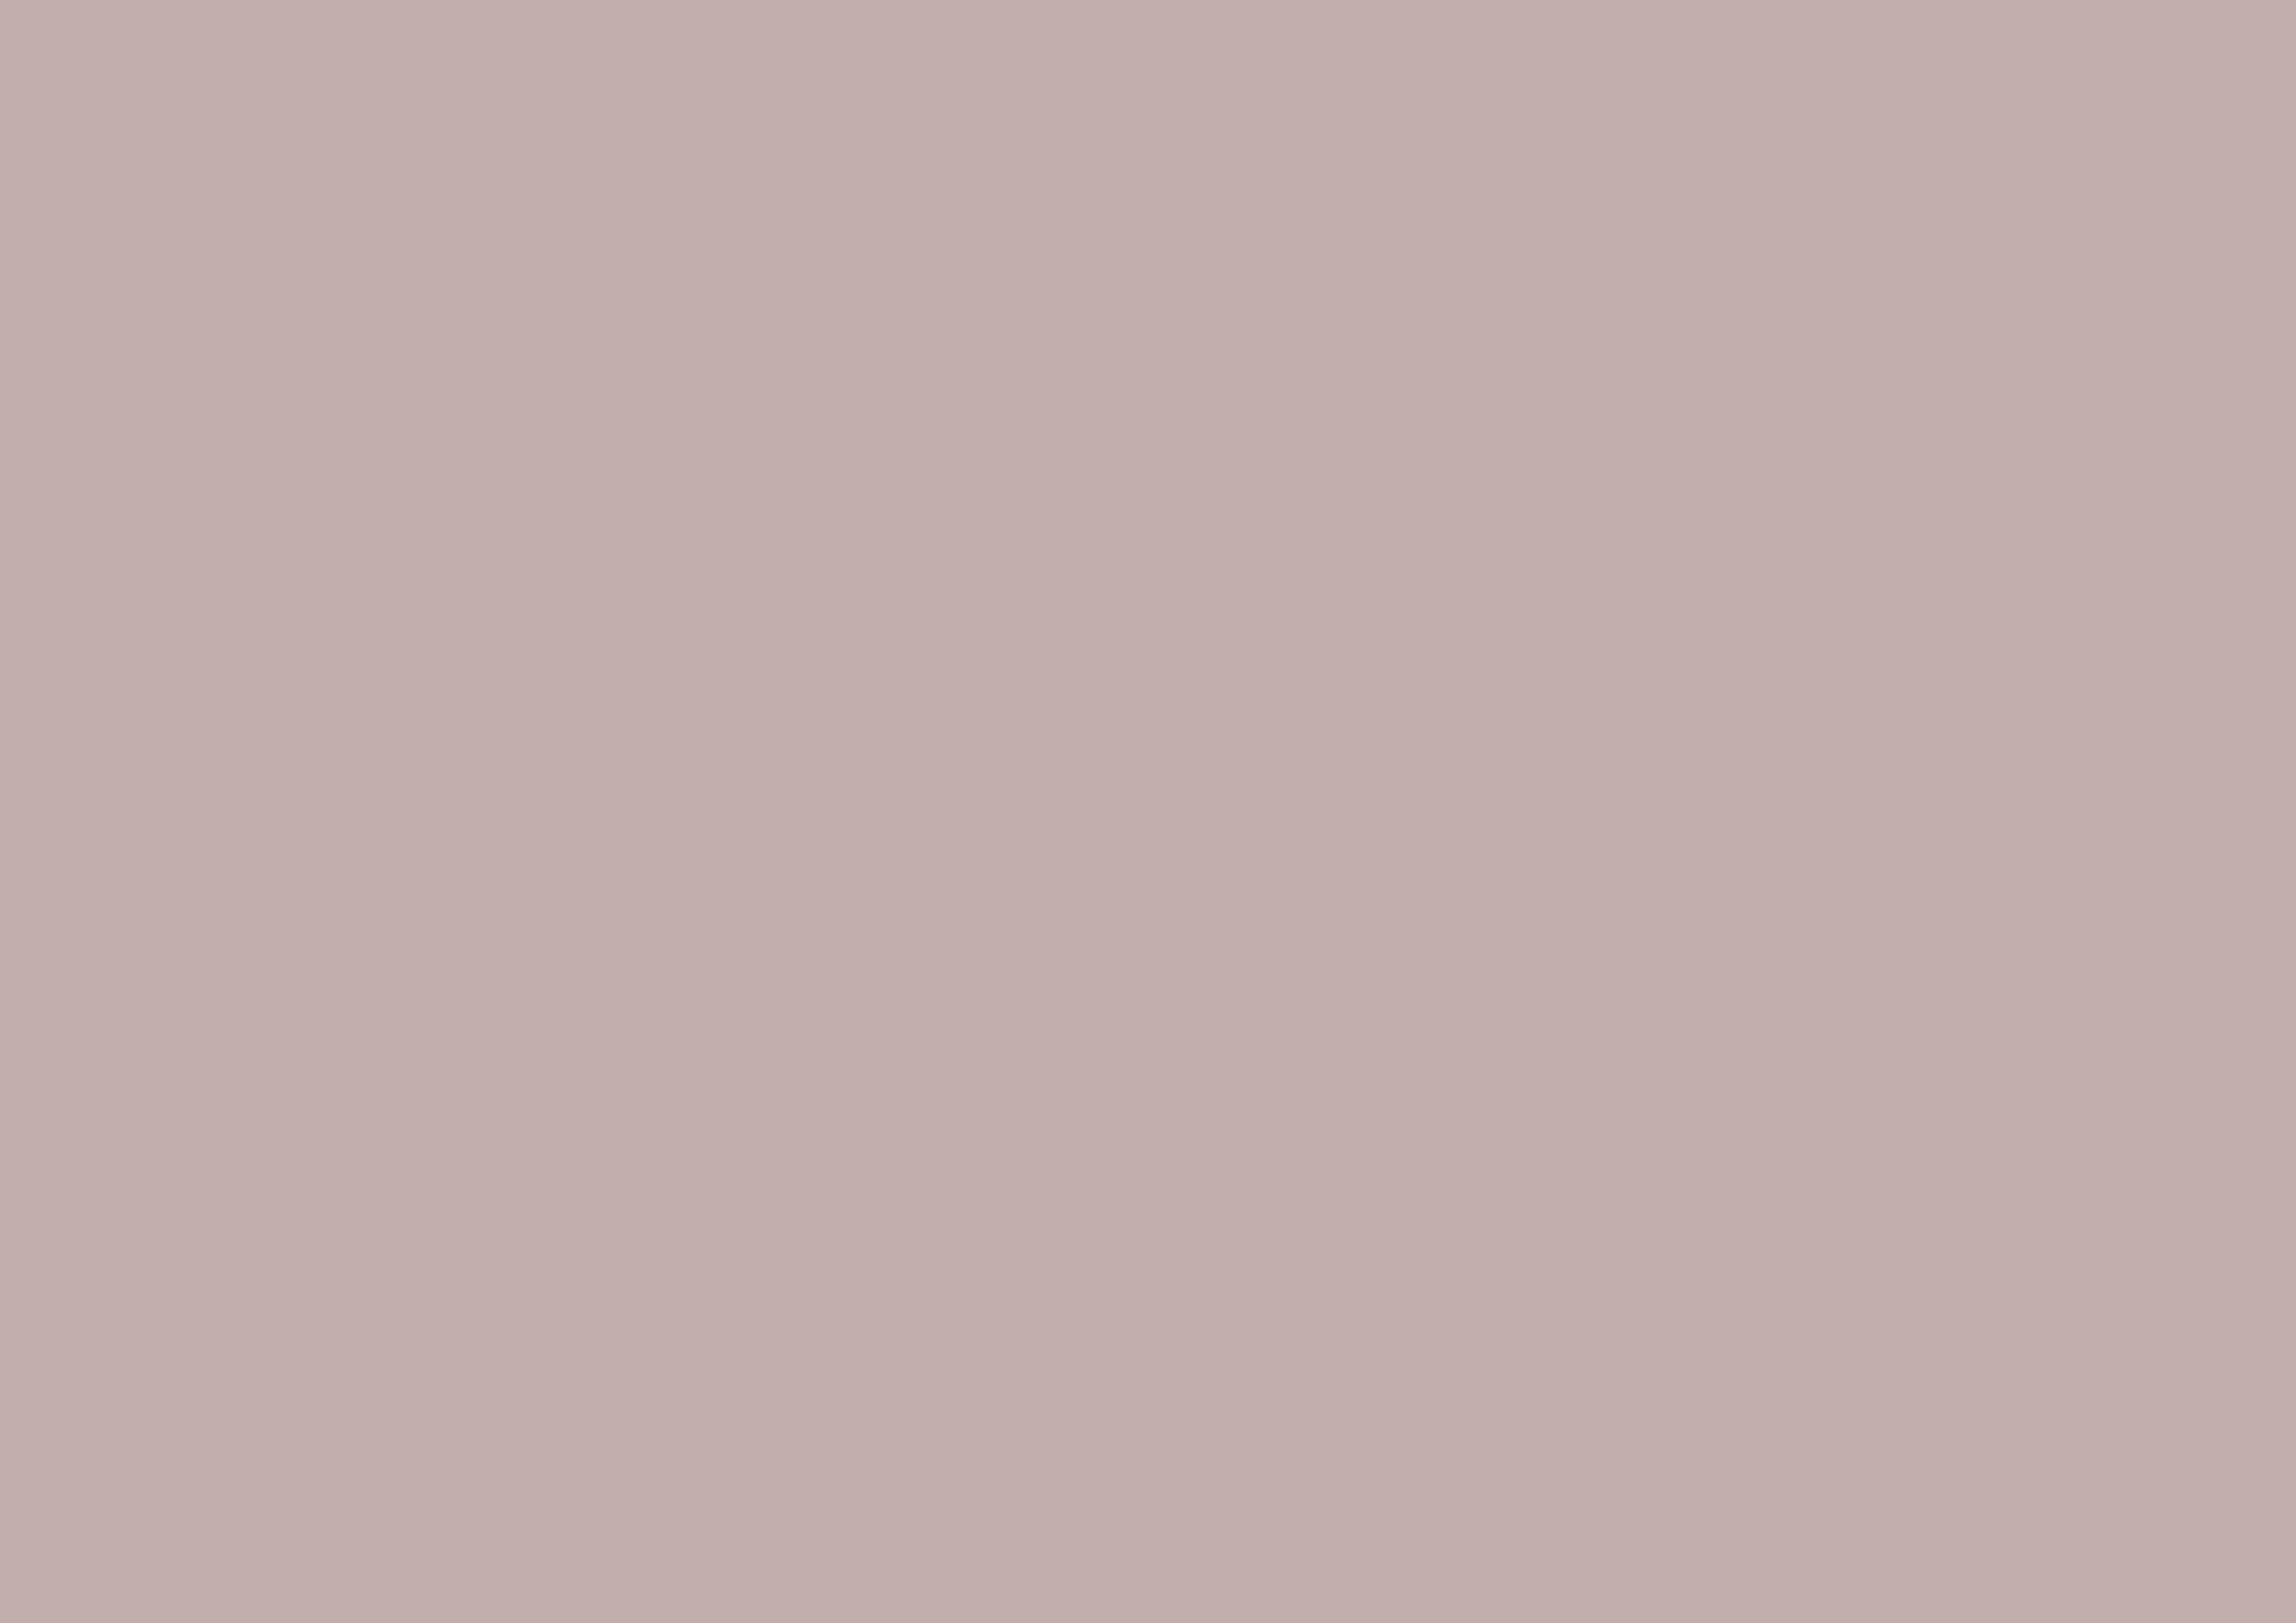 3508x2480 Silver Pink Solid Color Background